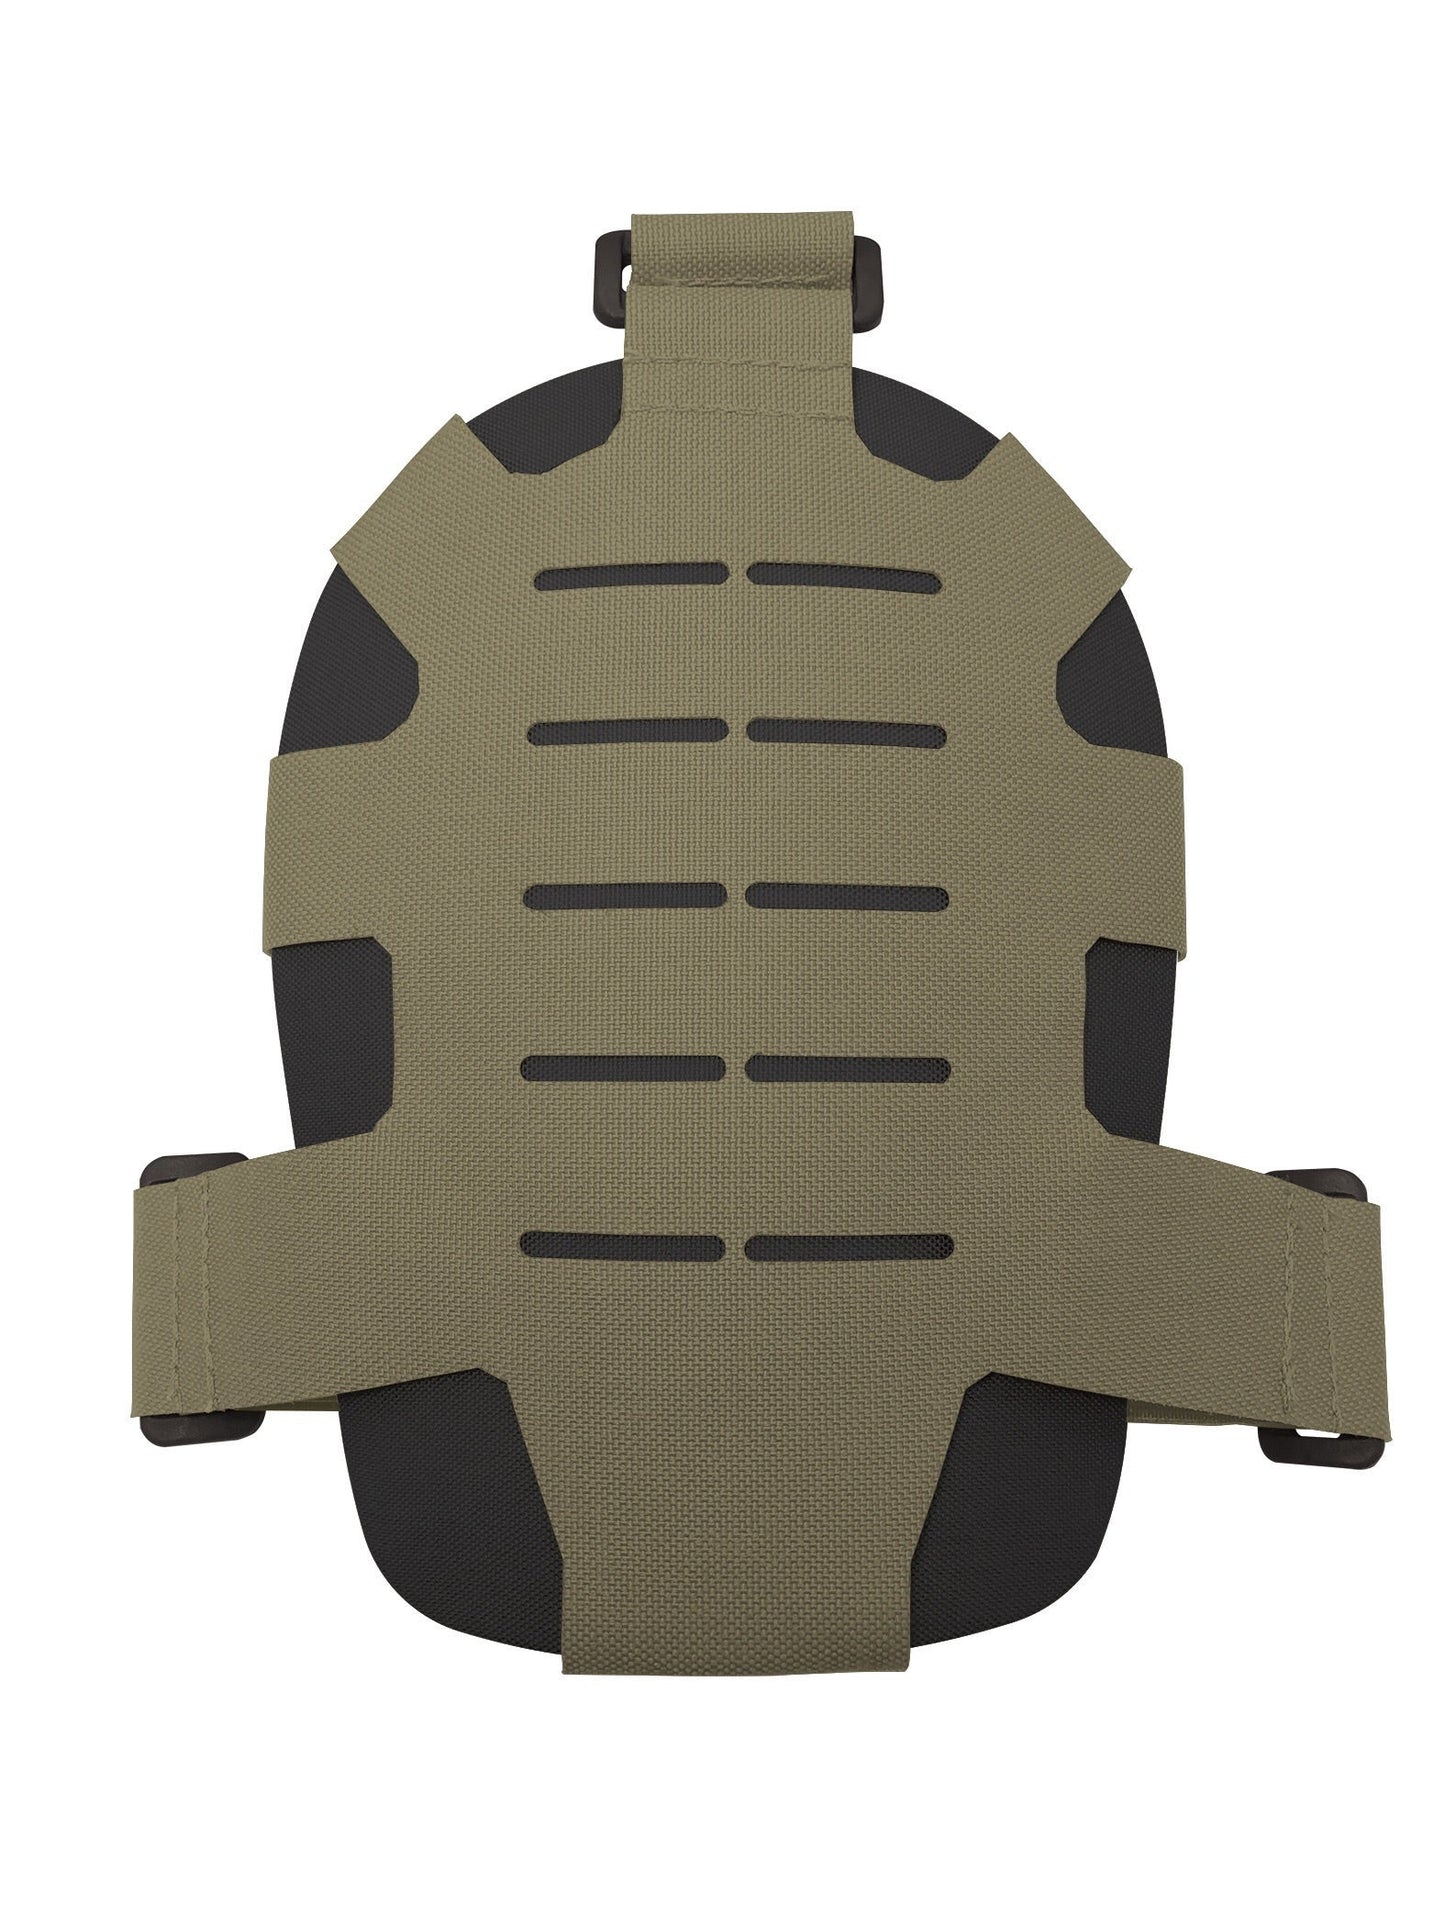 Two Rogue Shoulder Plate Carriers